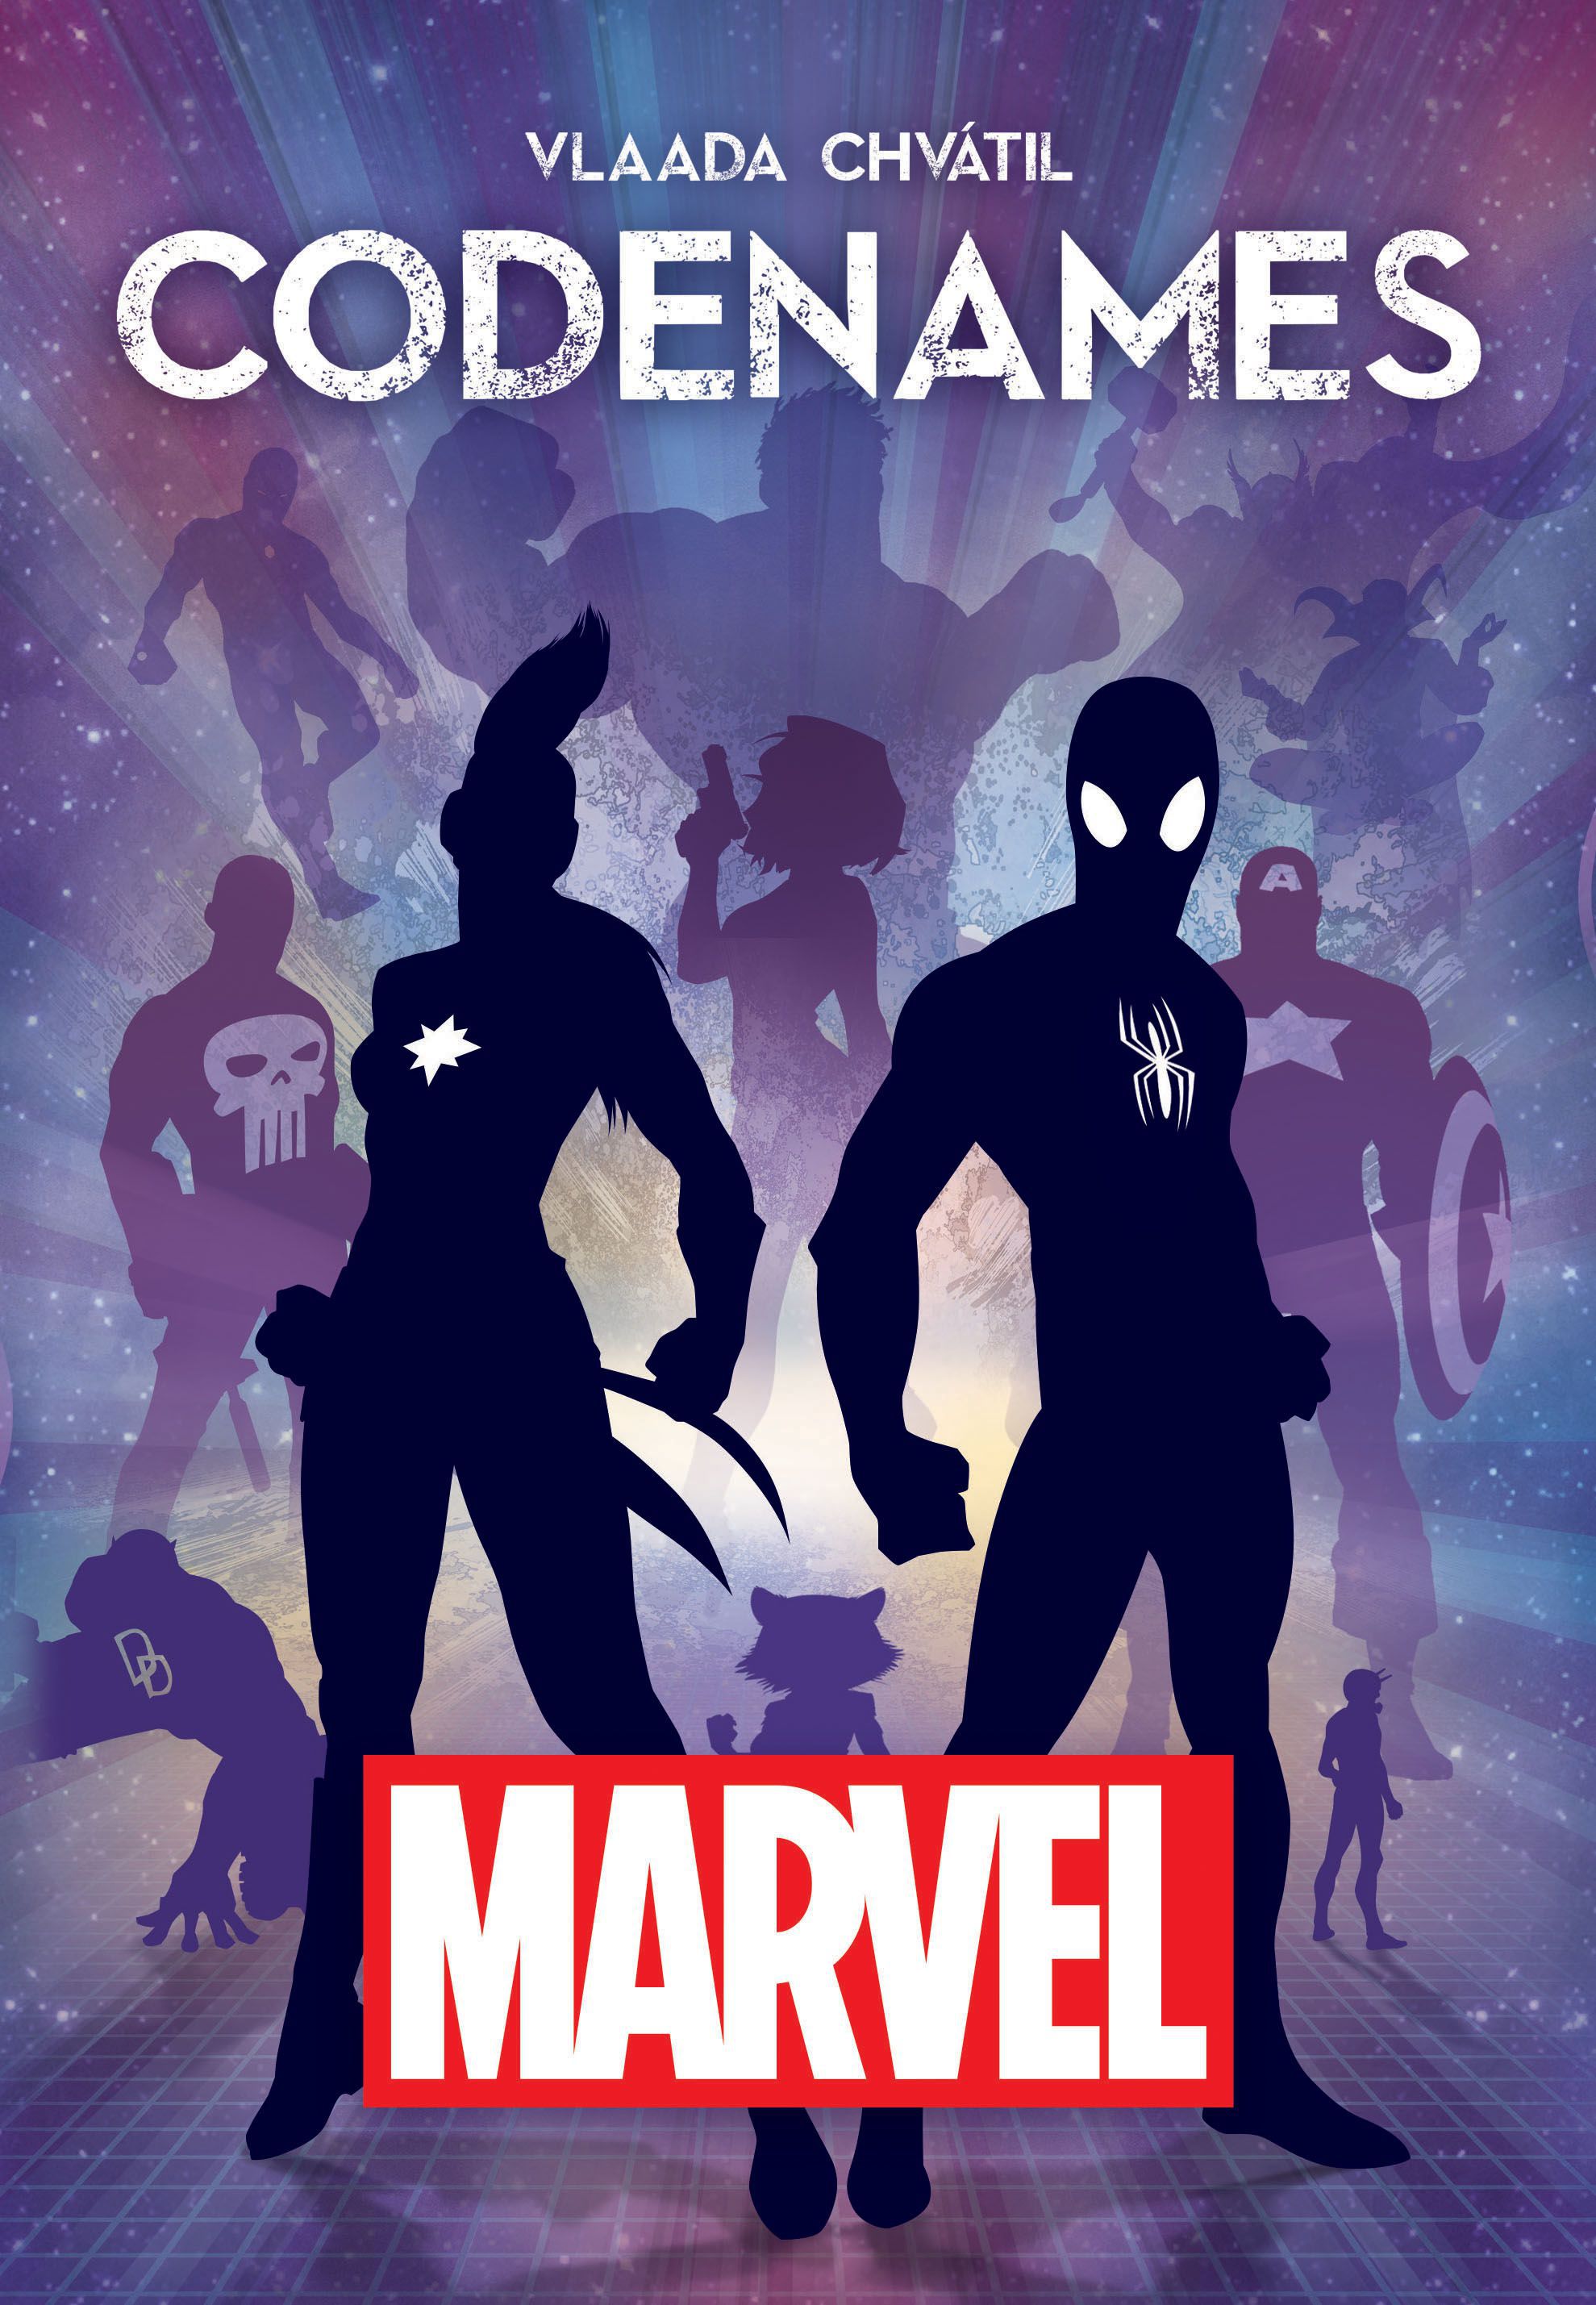 Codenmes : Marvel